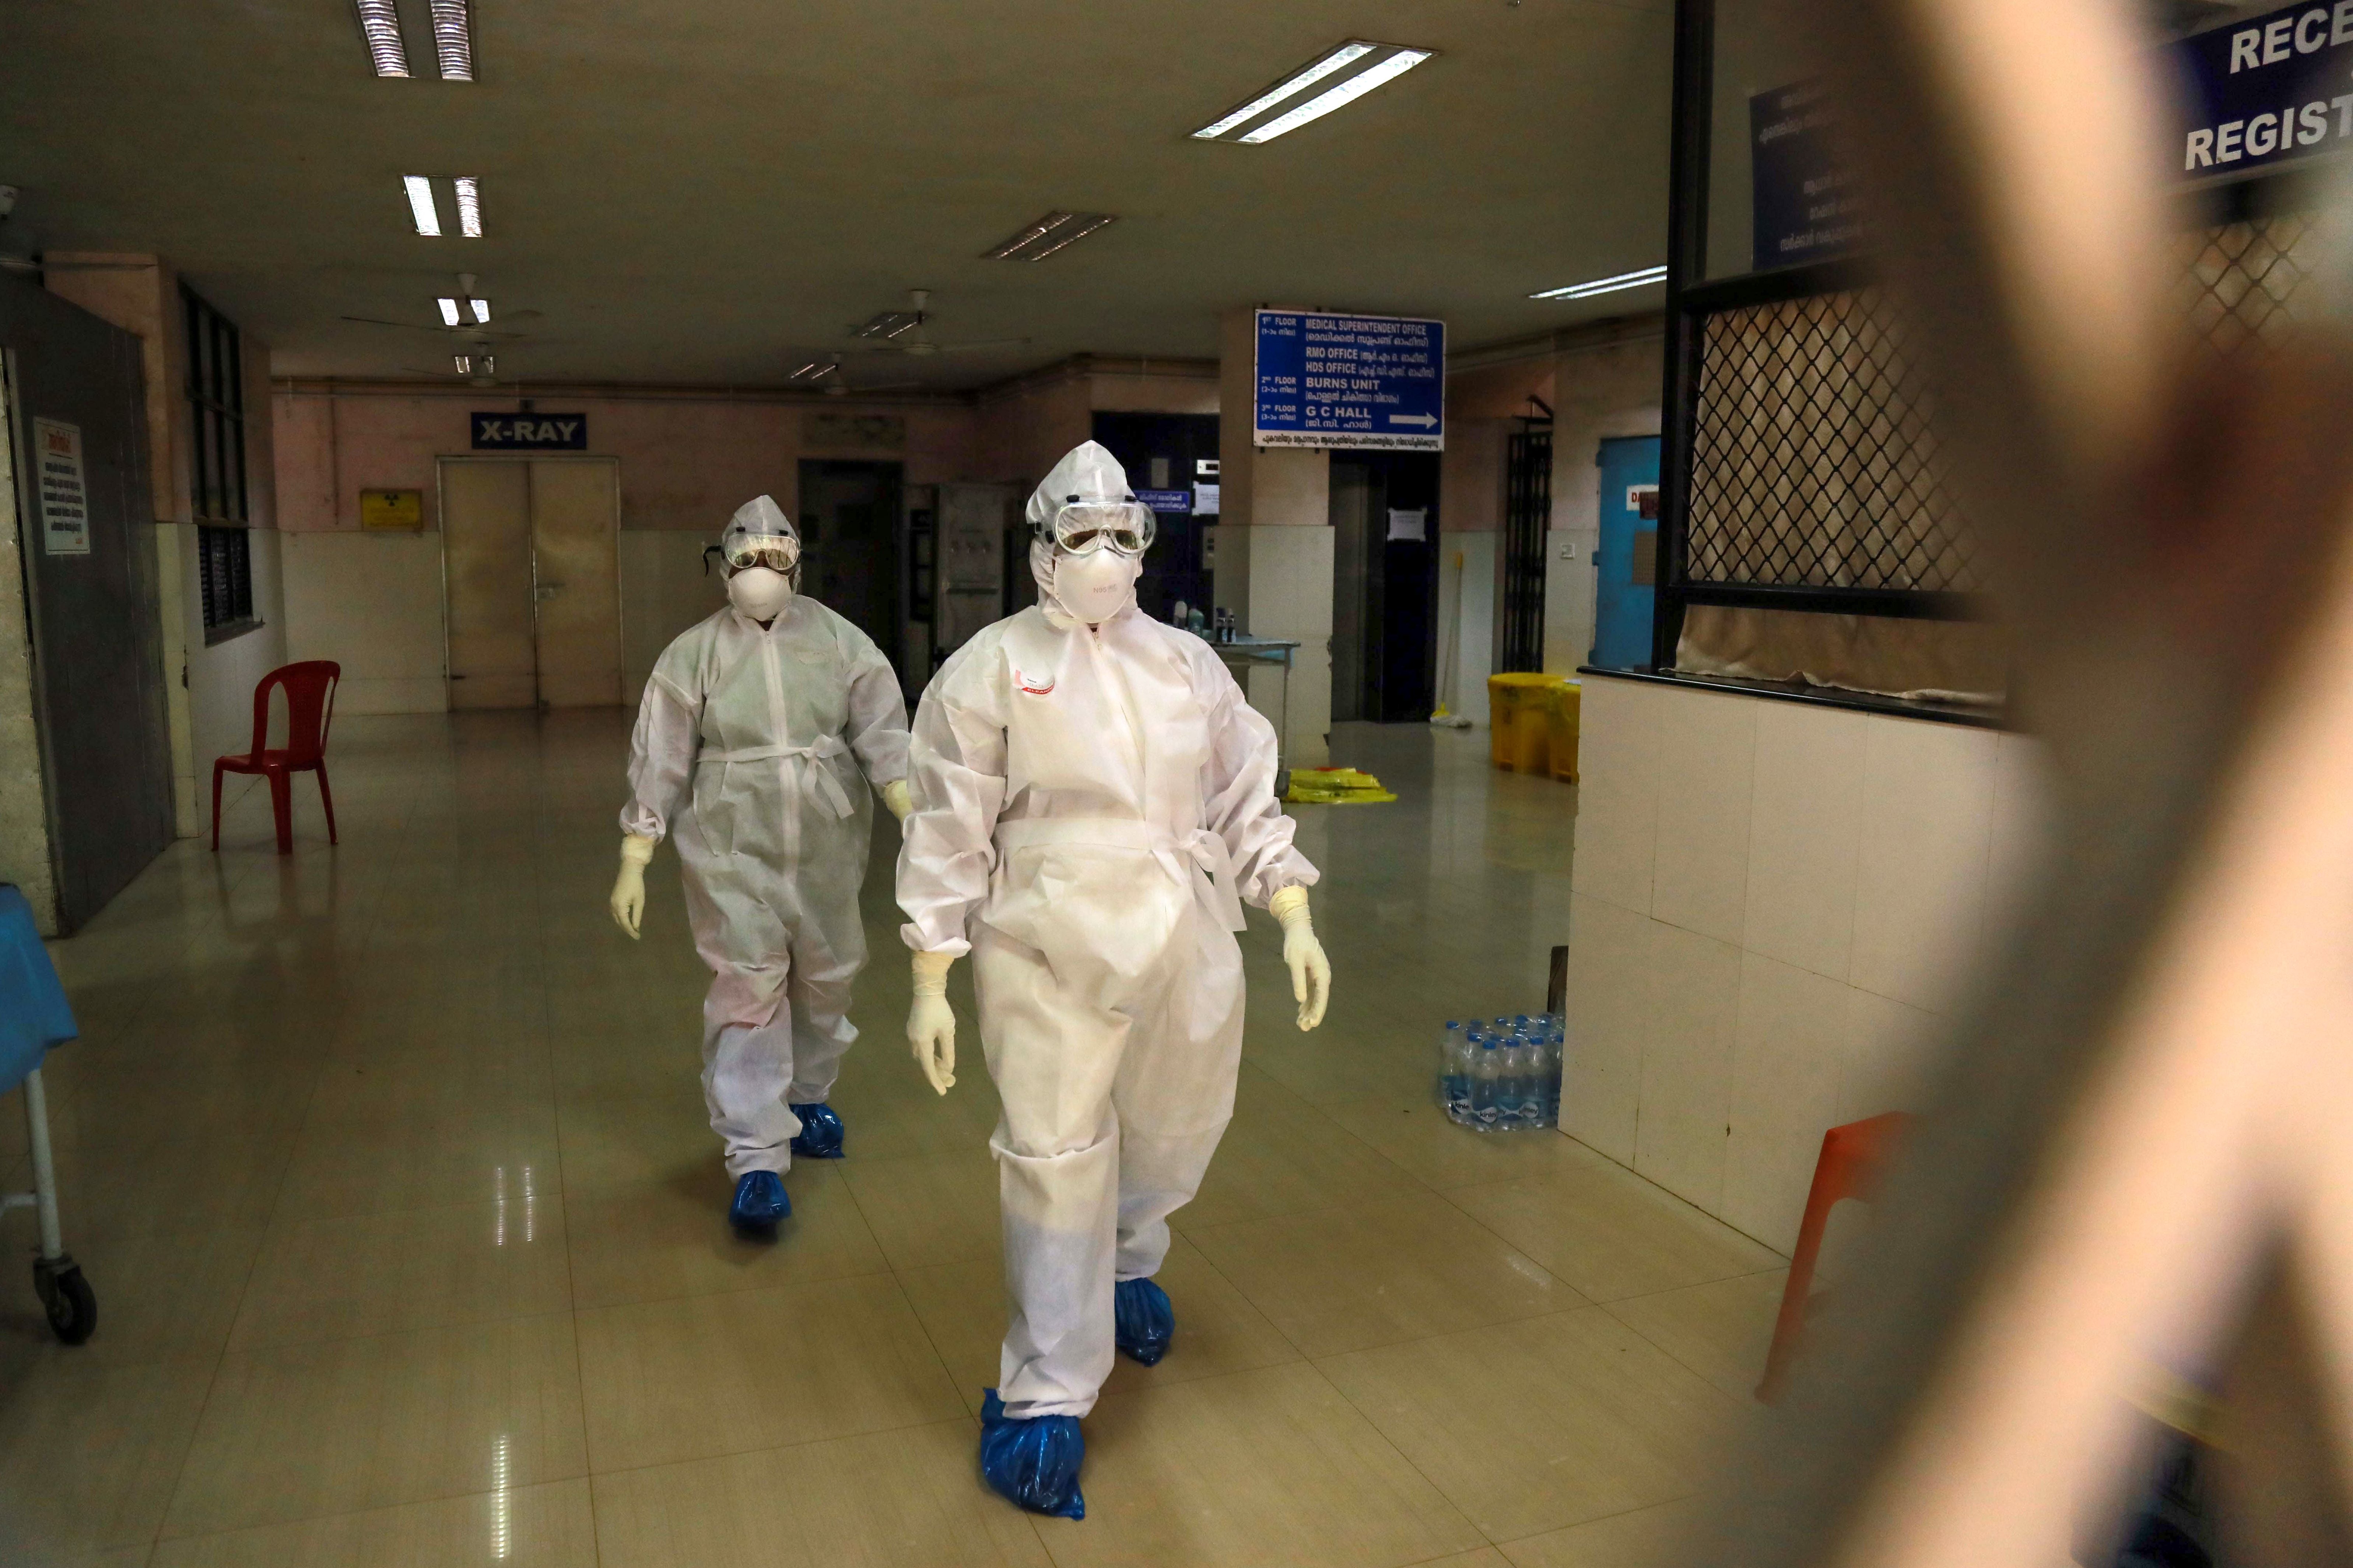 File. Health officials in full protective gear walk inside an isolation ward in October 2021 in the Indian state of Kerala after 23-year-old was infected by the potentially deadly Nipah virus